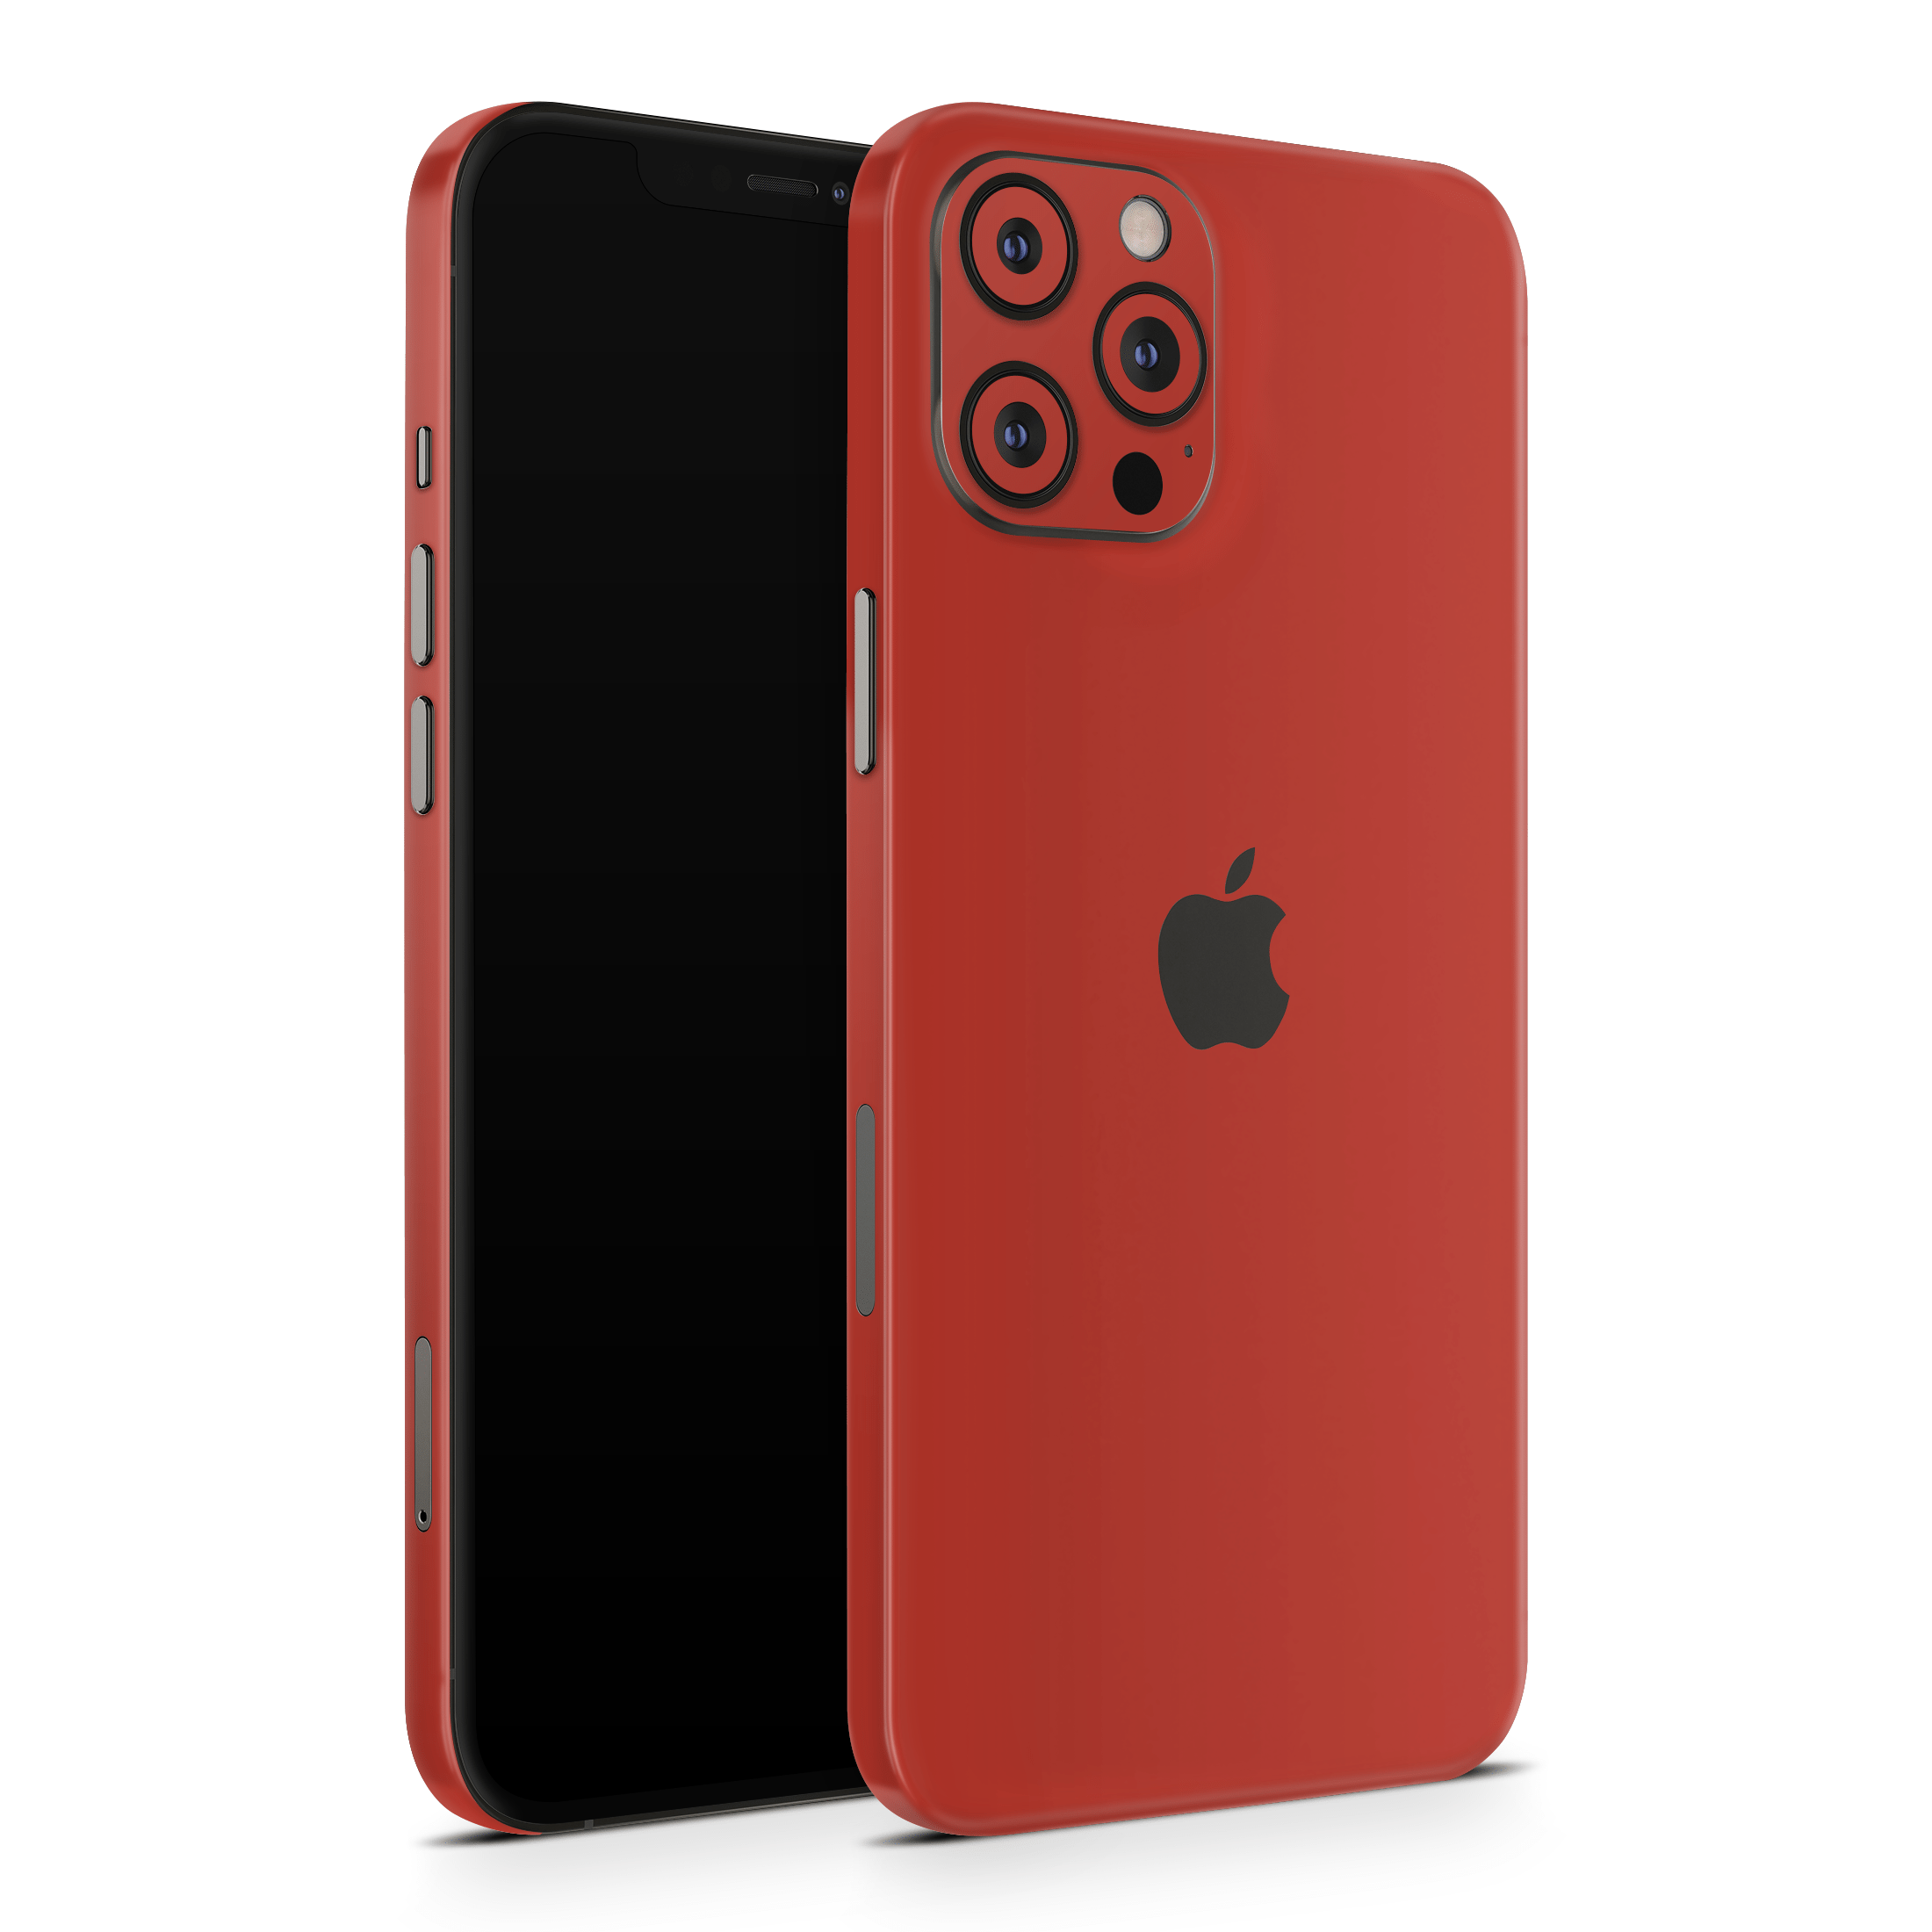 Cherry Red Apple iPhone Skins